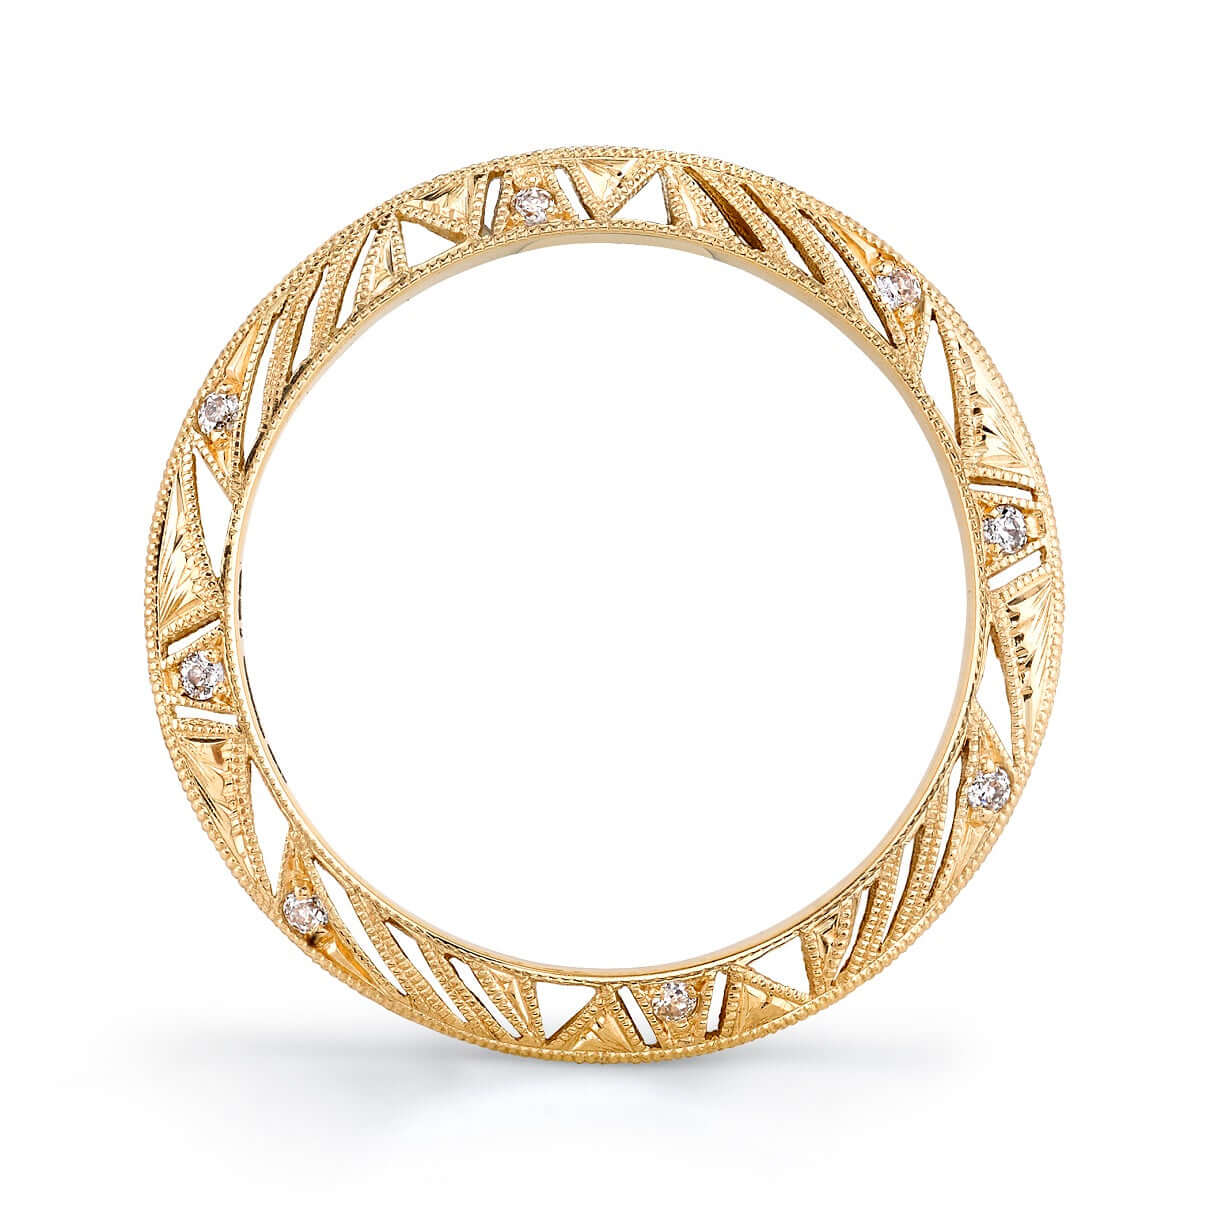 SINGLE STONE PHOENIX BAND | Approximately 0.10ctw G-H/VS old European cut diamonds set in a handcrafted 18K yellow gold eternity band. Available in an oxidized or polished finish. Approximate band with 2.4mm. Please inquire for additional customization.